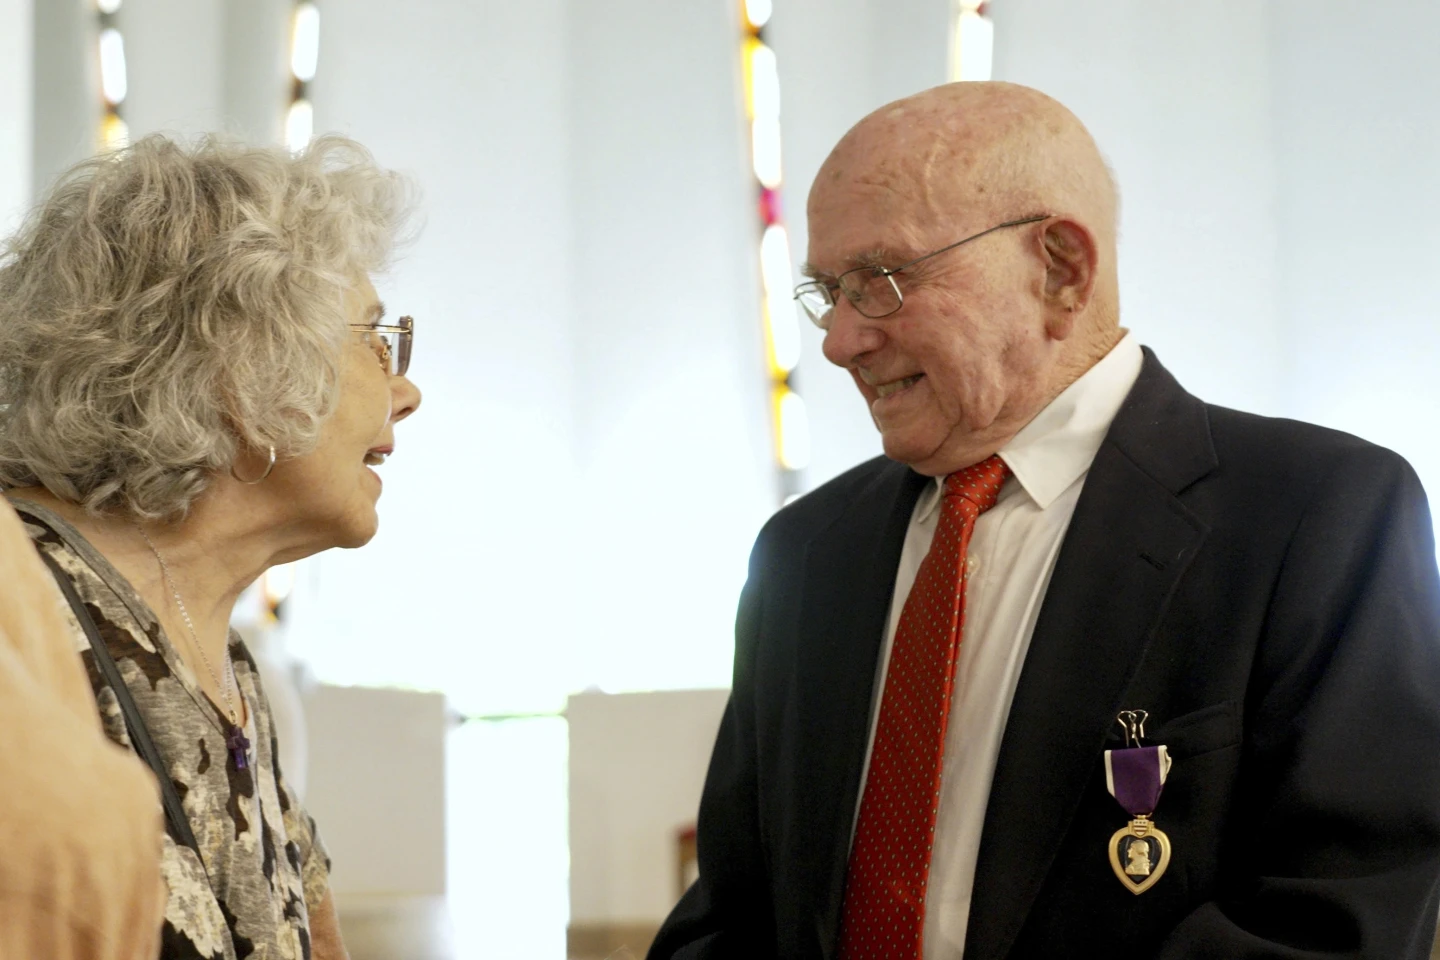 Army presents Purple Heart to Minnesota veteran 73 years after he was wounded in Korean War